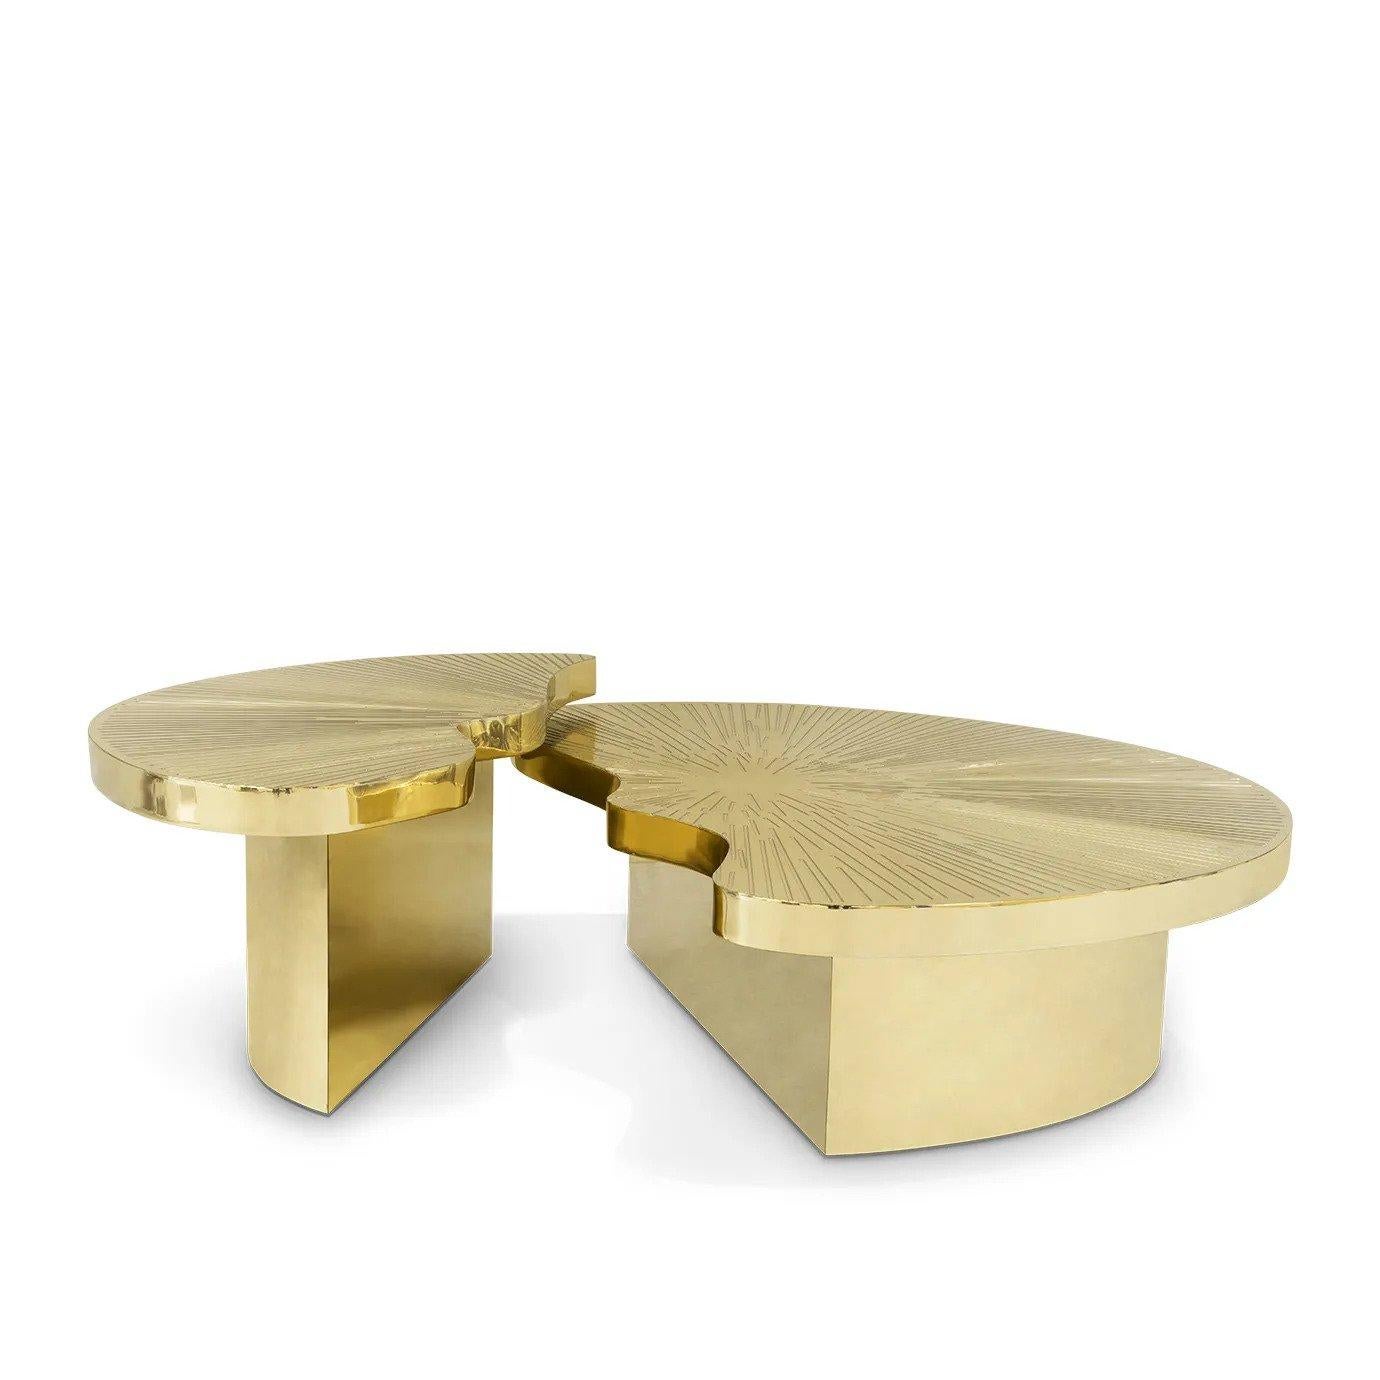 Radiant glamour emanates from the Myth Cocktail Table as two individual brass parts set at varying heights with a shared sun-burst etched top unite creating a statement work of furniture art.